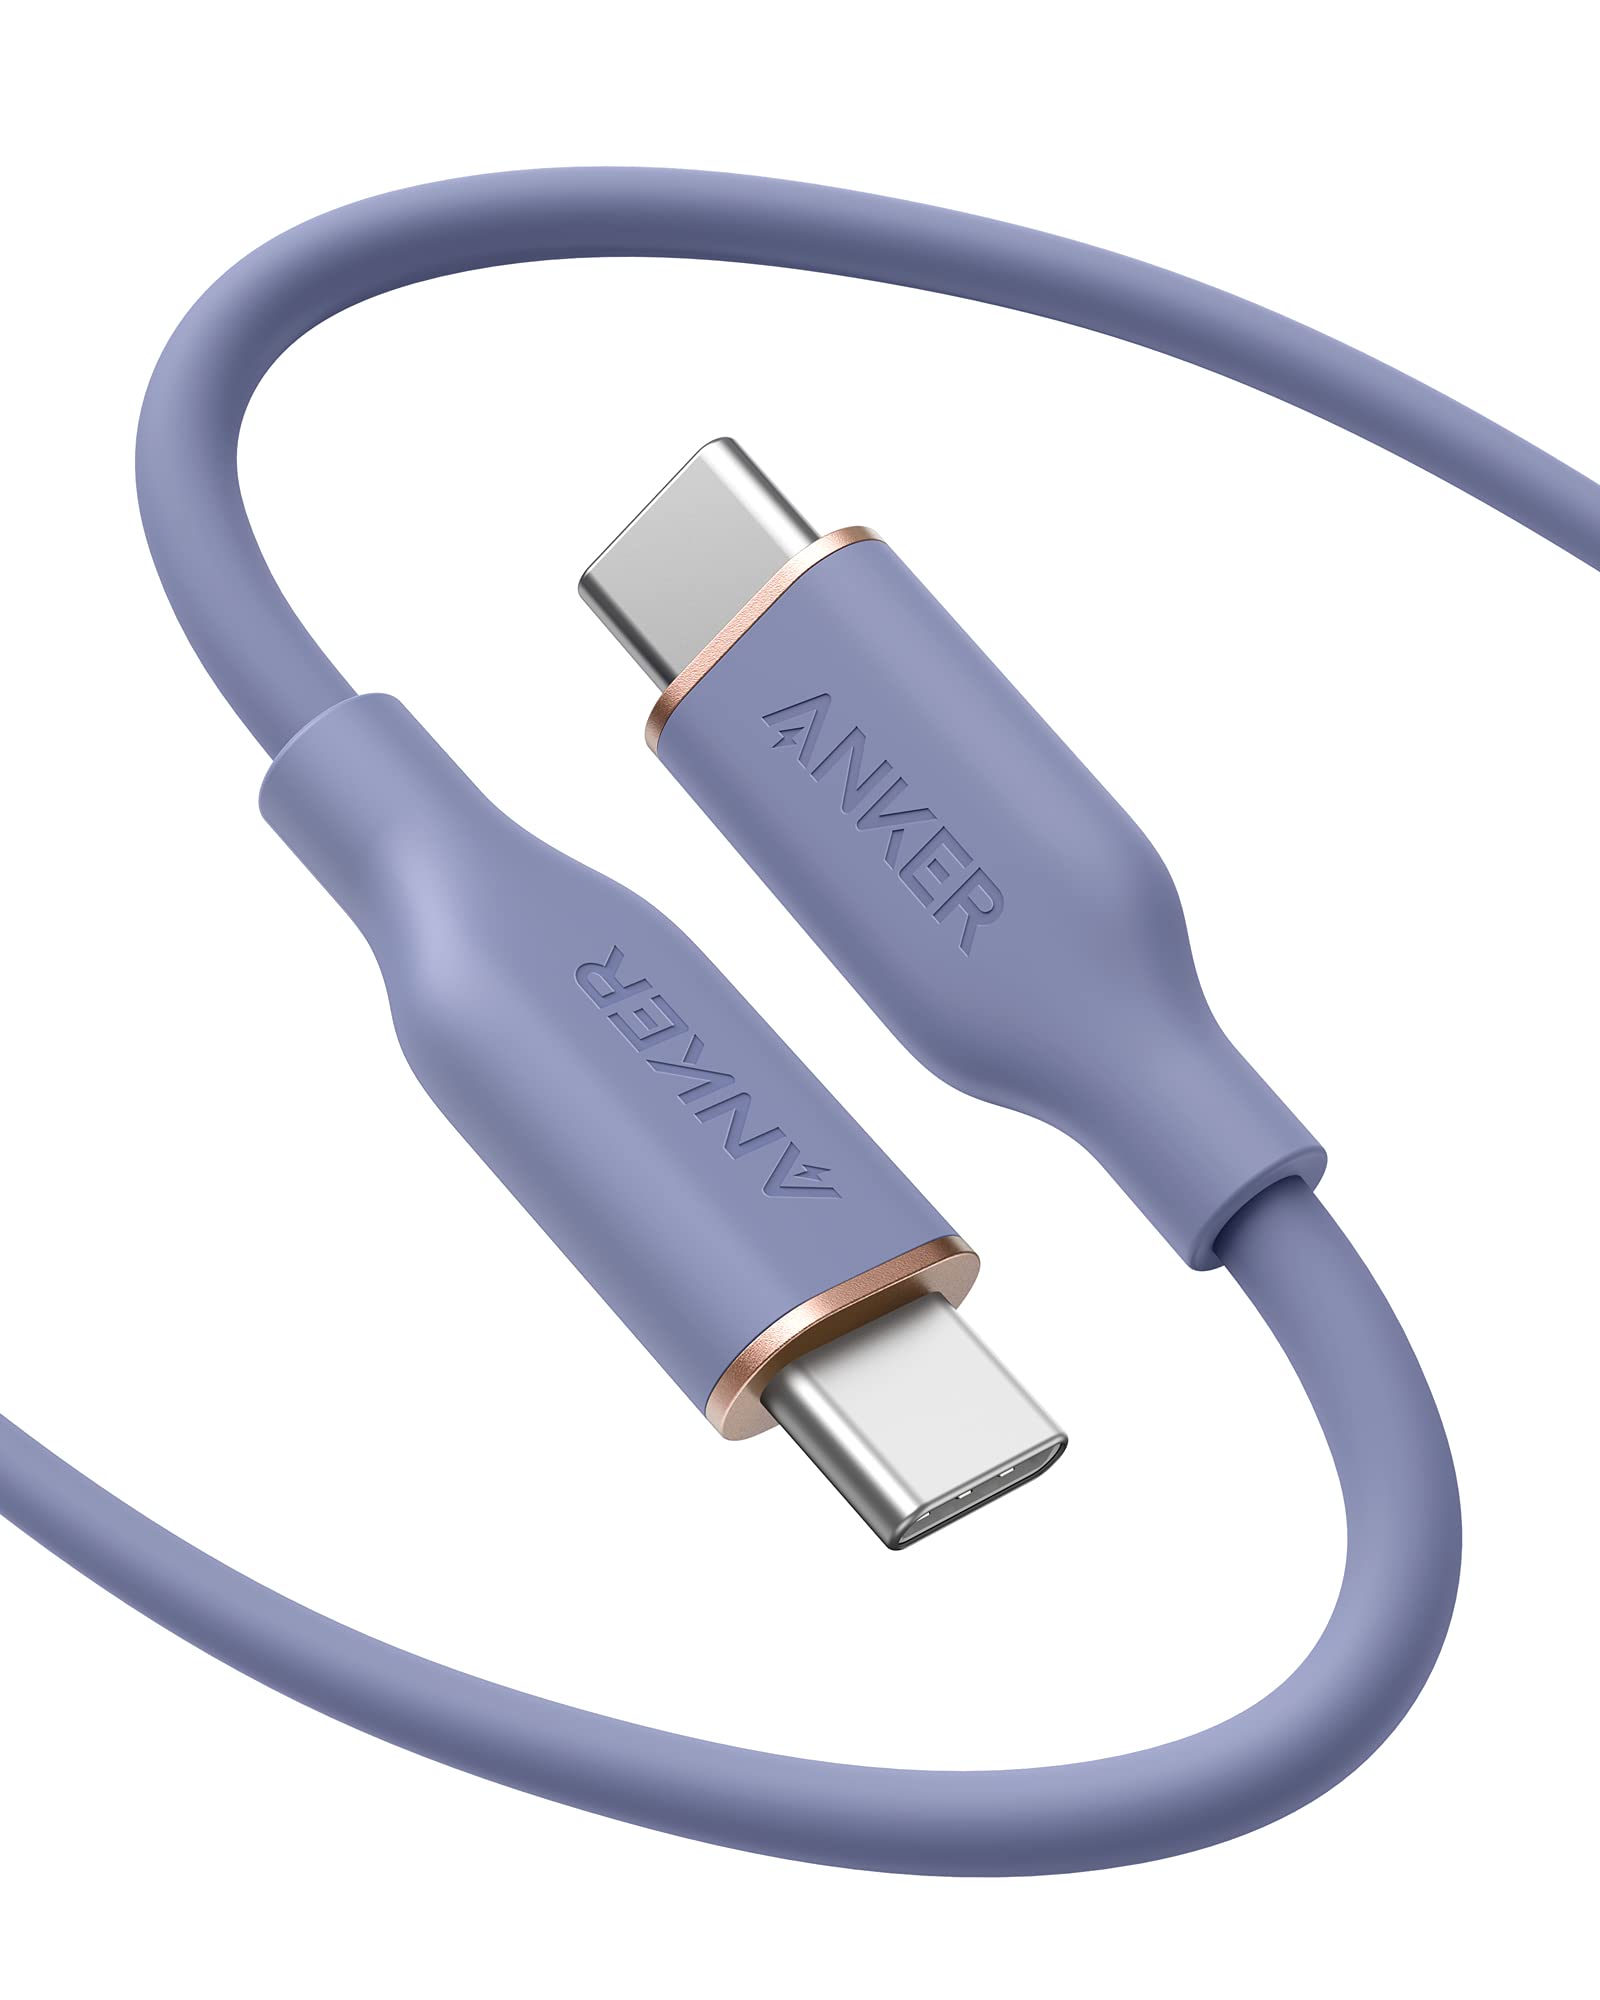 Photos - Cable (video, audio, USB) ANKER 643 USB-C to USB-C Cable  6ft / Lavender Grey A85530 (Flow, Silicone)